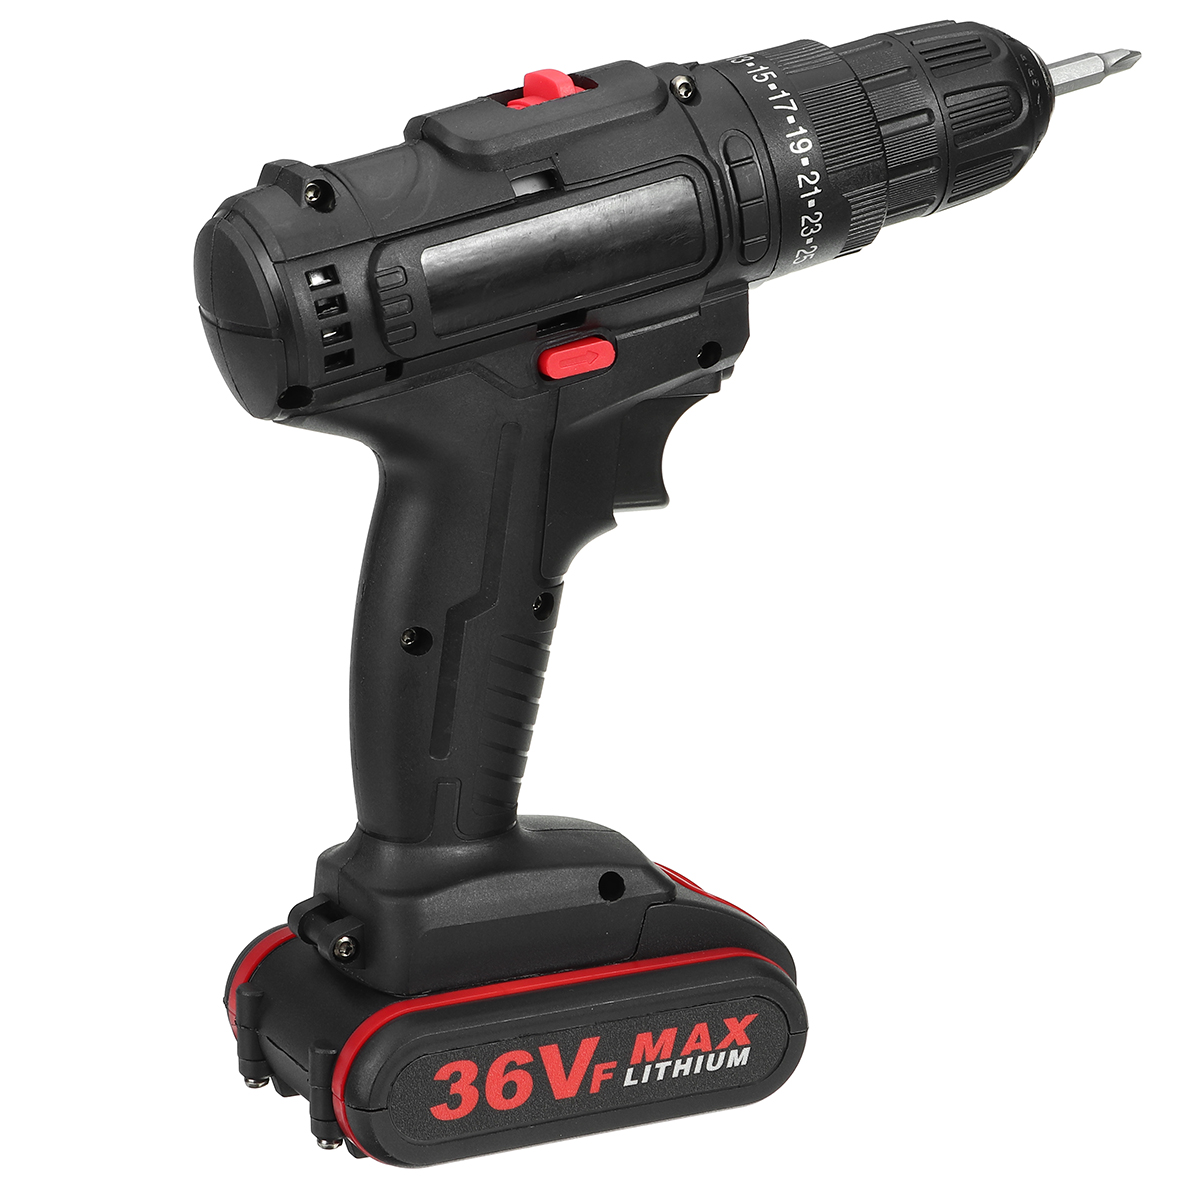 36V-Cordless-Electric-Impact-Hammer-LED-Light-Drill-Screwdriver-With-2-Battery-Household-Power-Tools-1779033-9